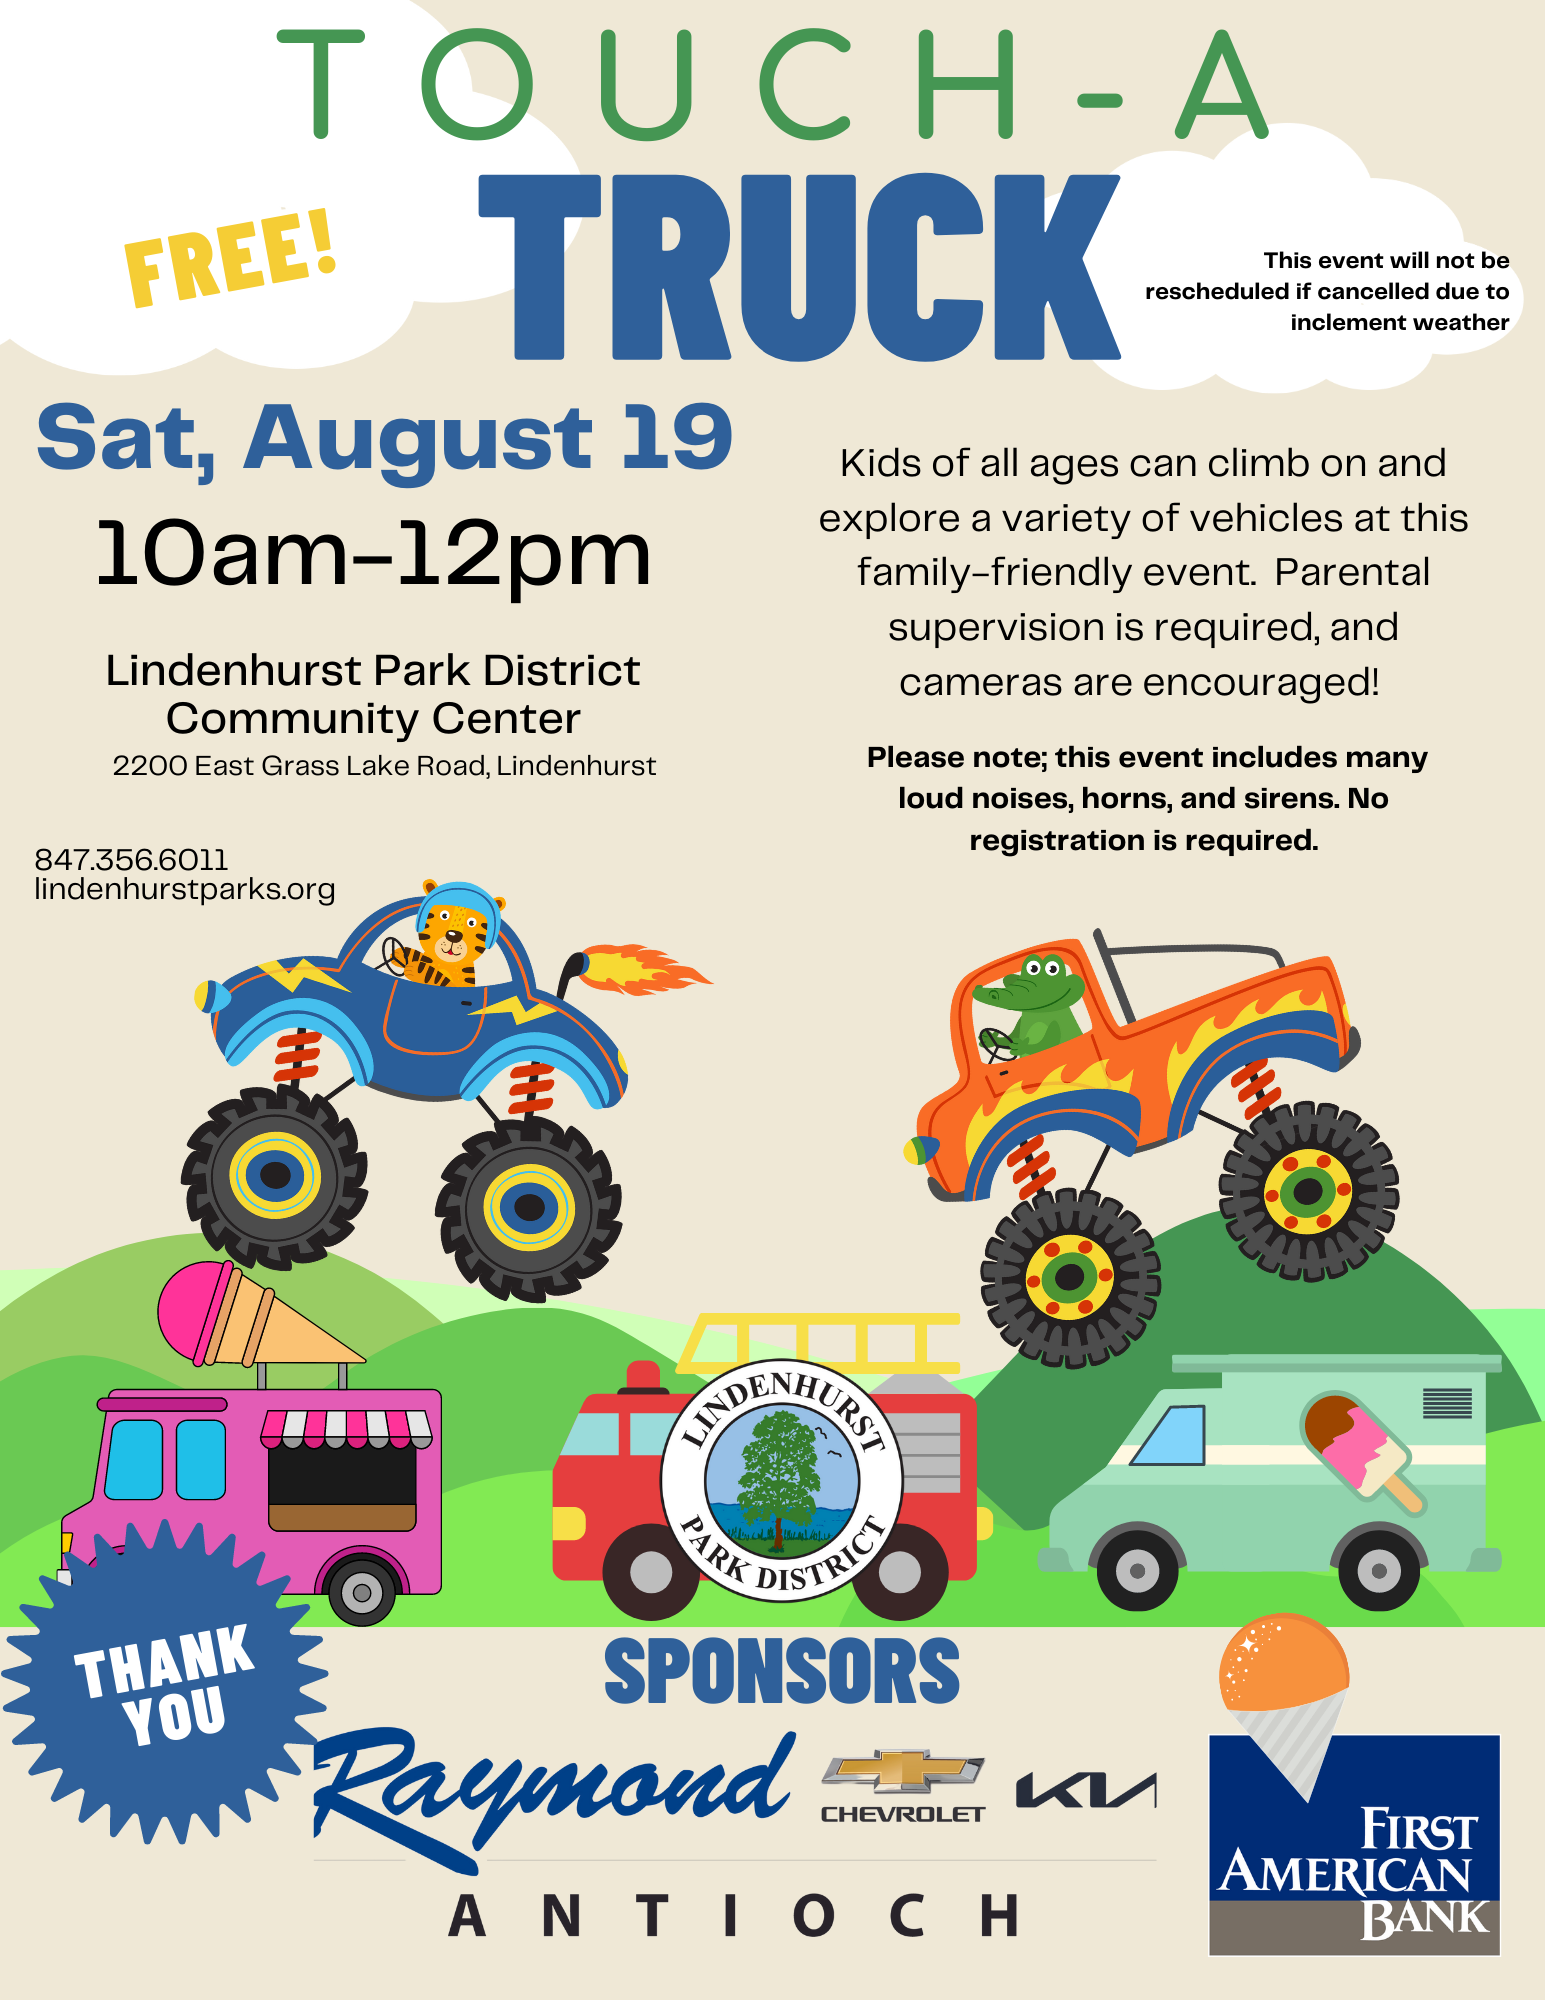 Flyer for a free event "TOUCH-A-TRUCK" on Saturday, August 19 from 10 am to 12 pm at Lindenhurst Park District Community Center. It's a family-friendly event where kids can explore various vehicles; no registration is needed. The flyer notes that the event includes loud noises and is non-reschedulable if canceled due to bad weather. Sponsors like Raymond Chevrolet and First American Bank are thanked, with the park district's contact information provided